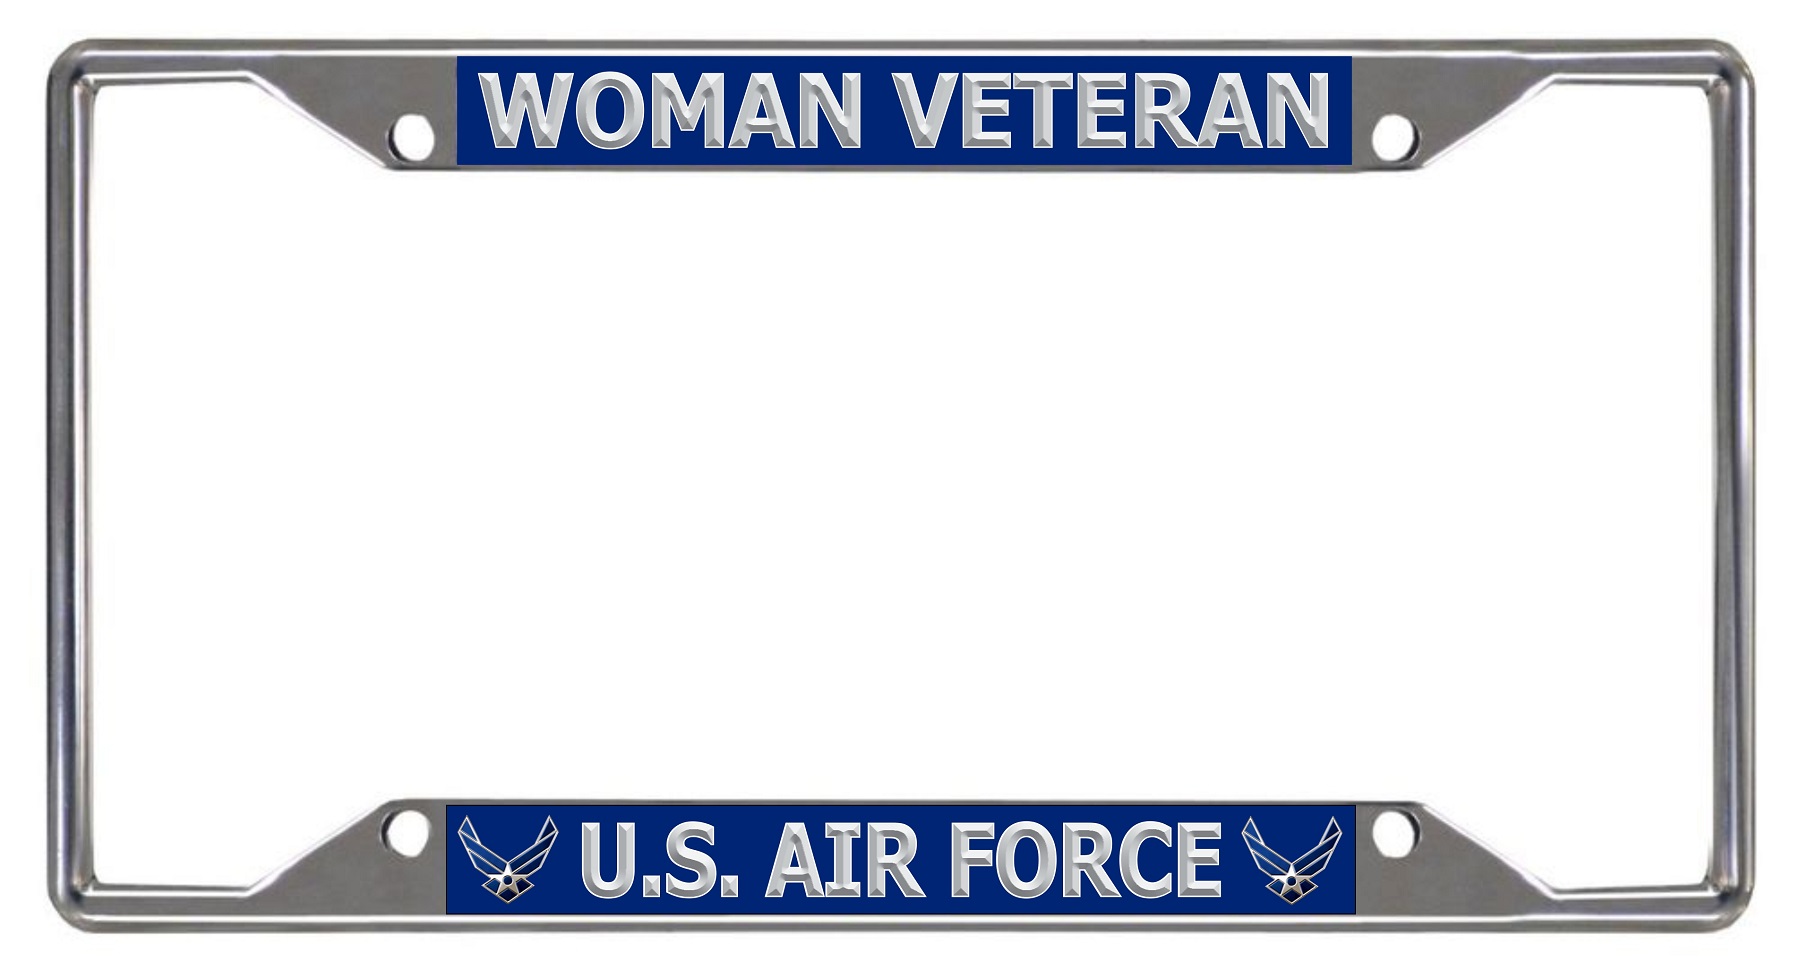 U.S. Air Force Woman Veteran Every State Chrome License Plate FRAME